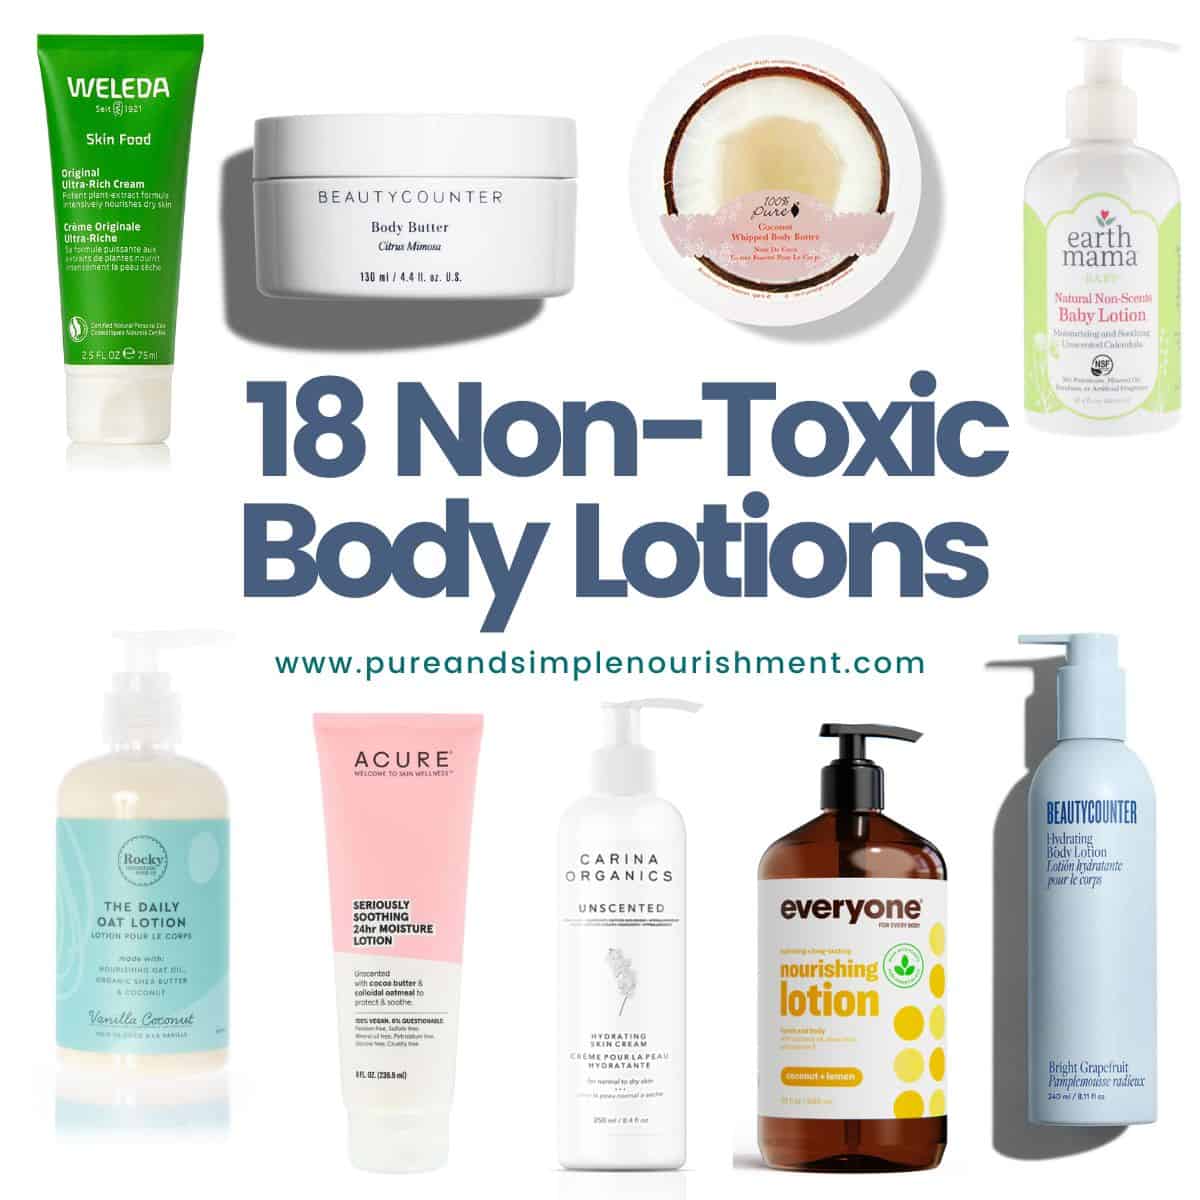 A collage body lotions with the title "Non Toxic Body Lotions" over them.